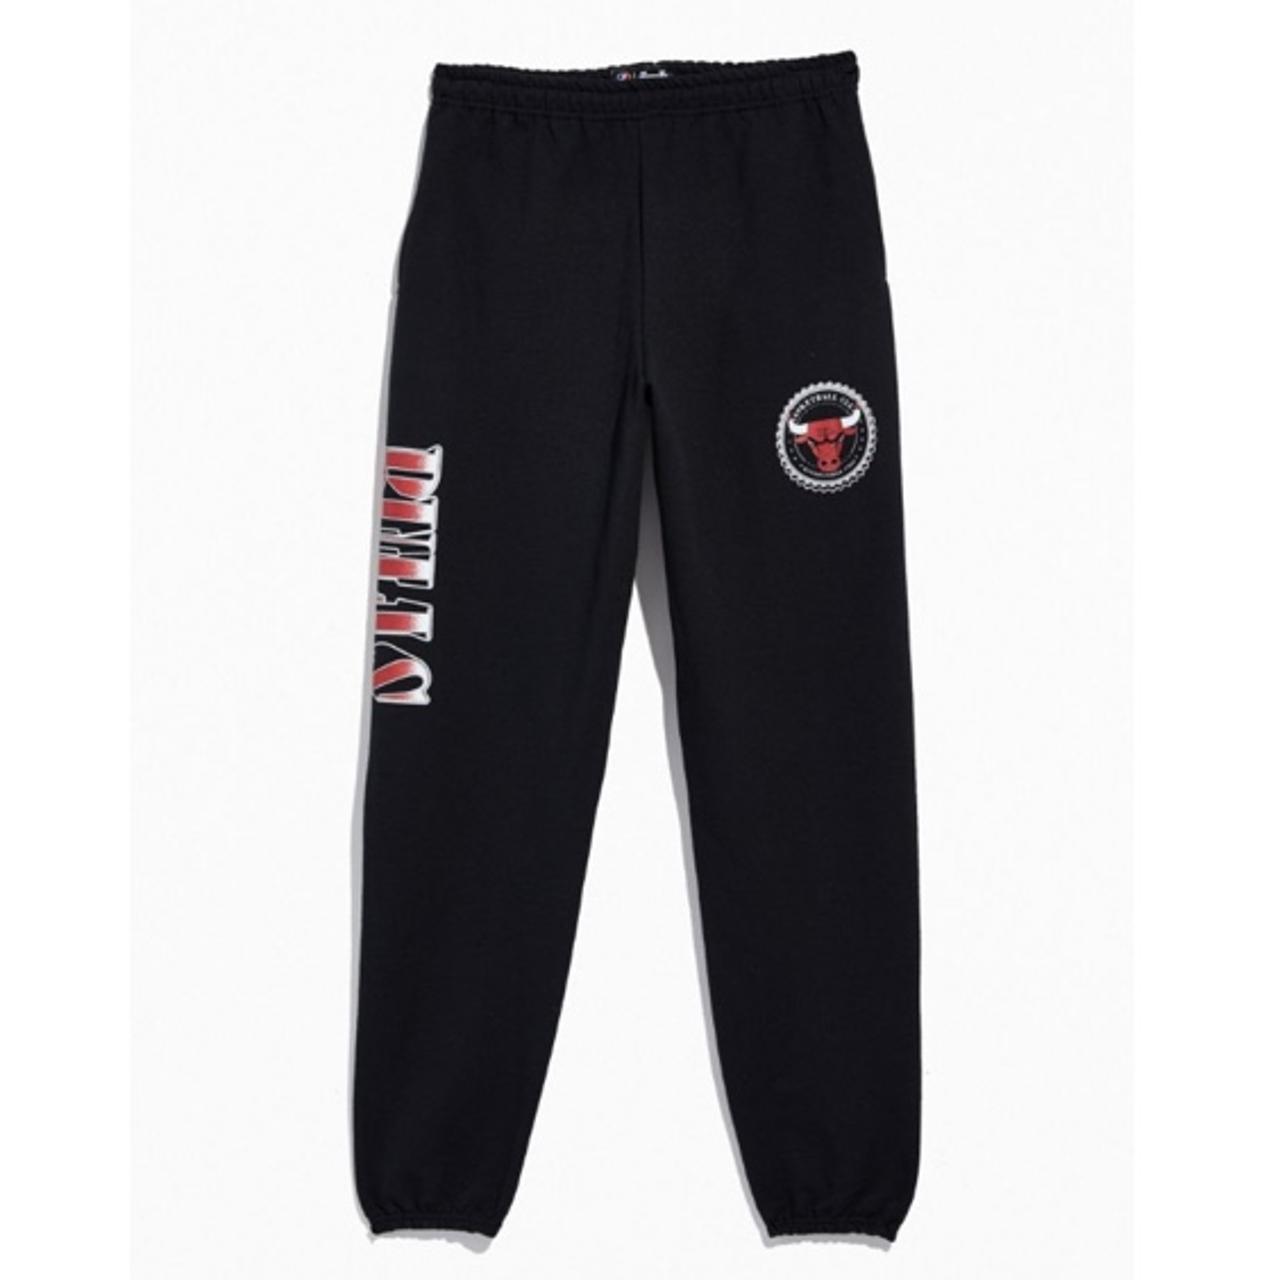 Men's Black and Red Joggers-tracksuits | Depop